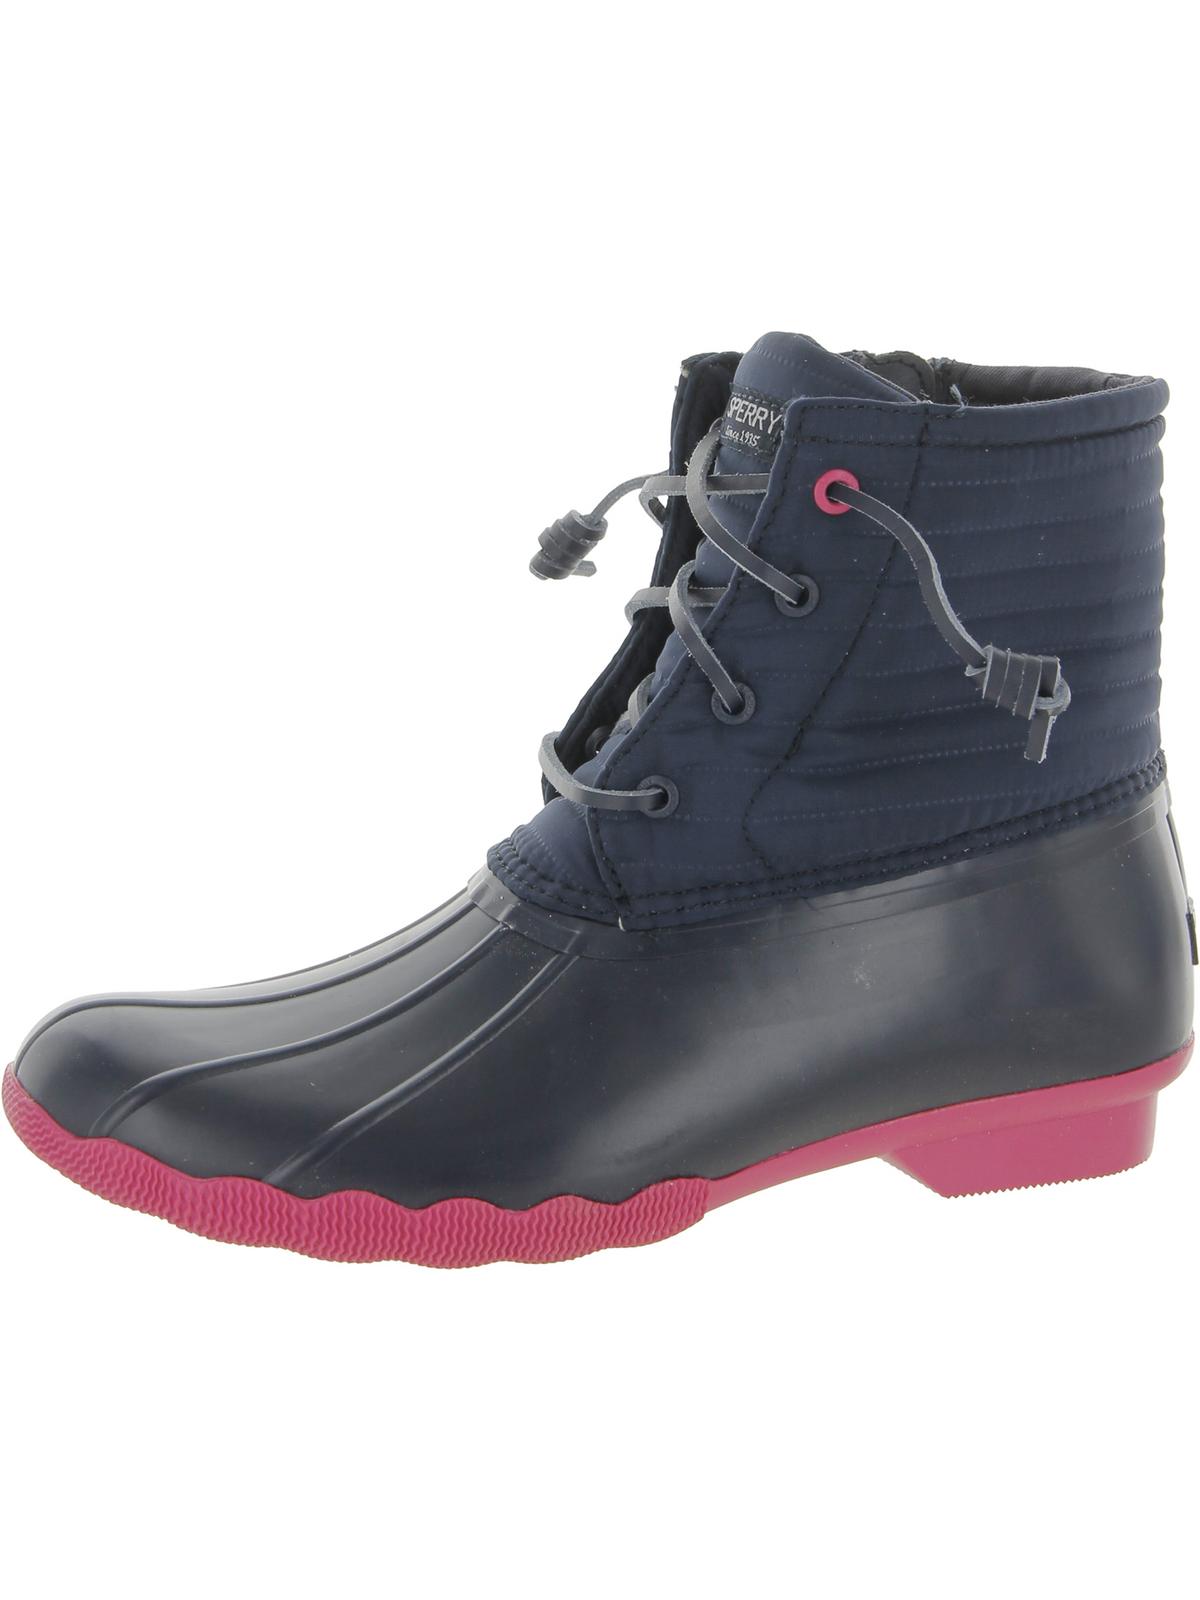 SPERRY Saltwater Girls Quilted Zip Up Rain Boots